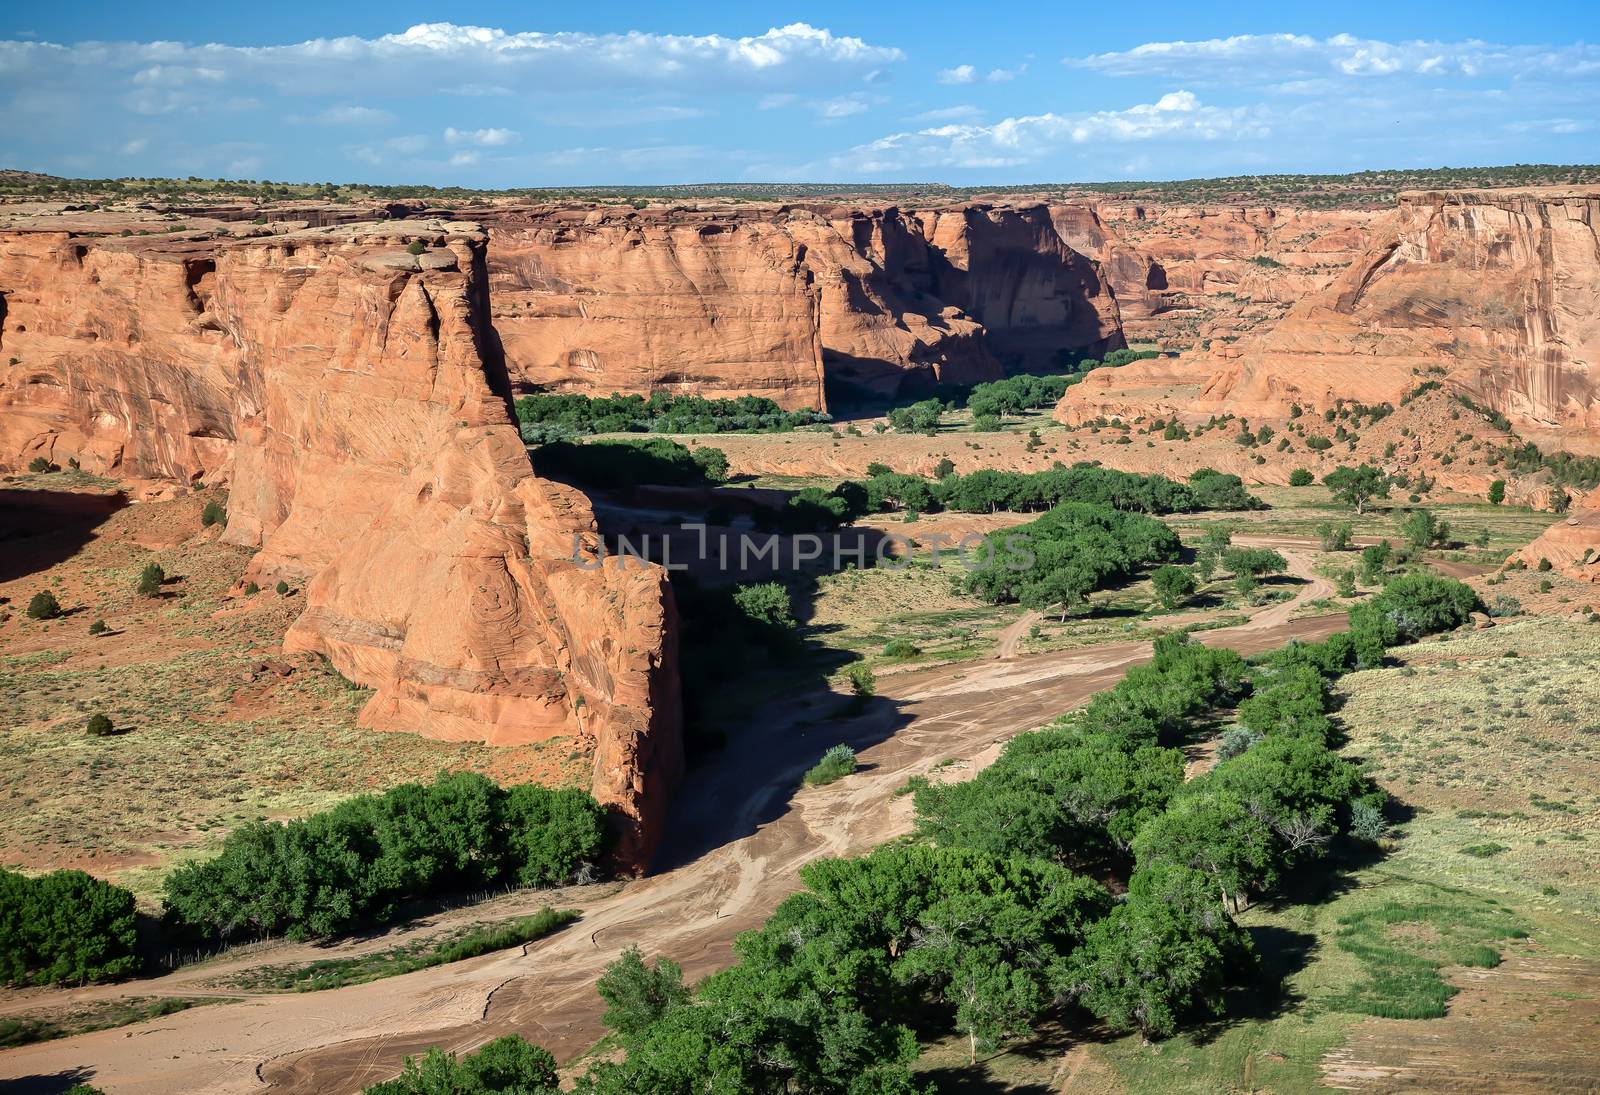 ancient native American trails and dwellings can all be found in Canyon de Chelly National Monument in Arizona.